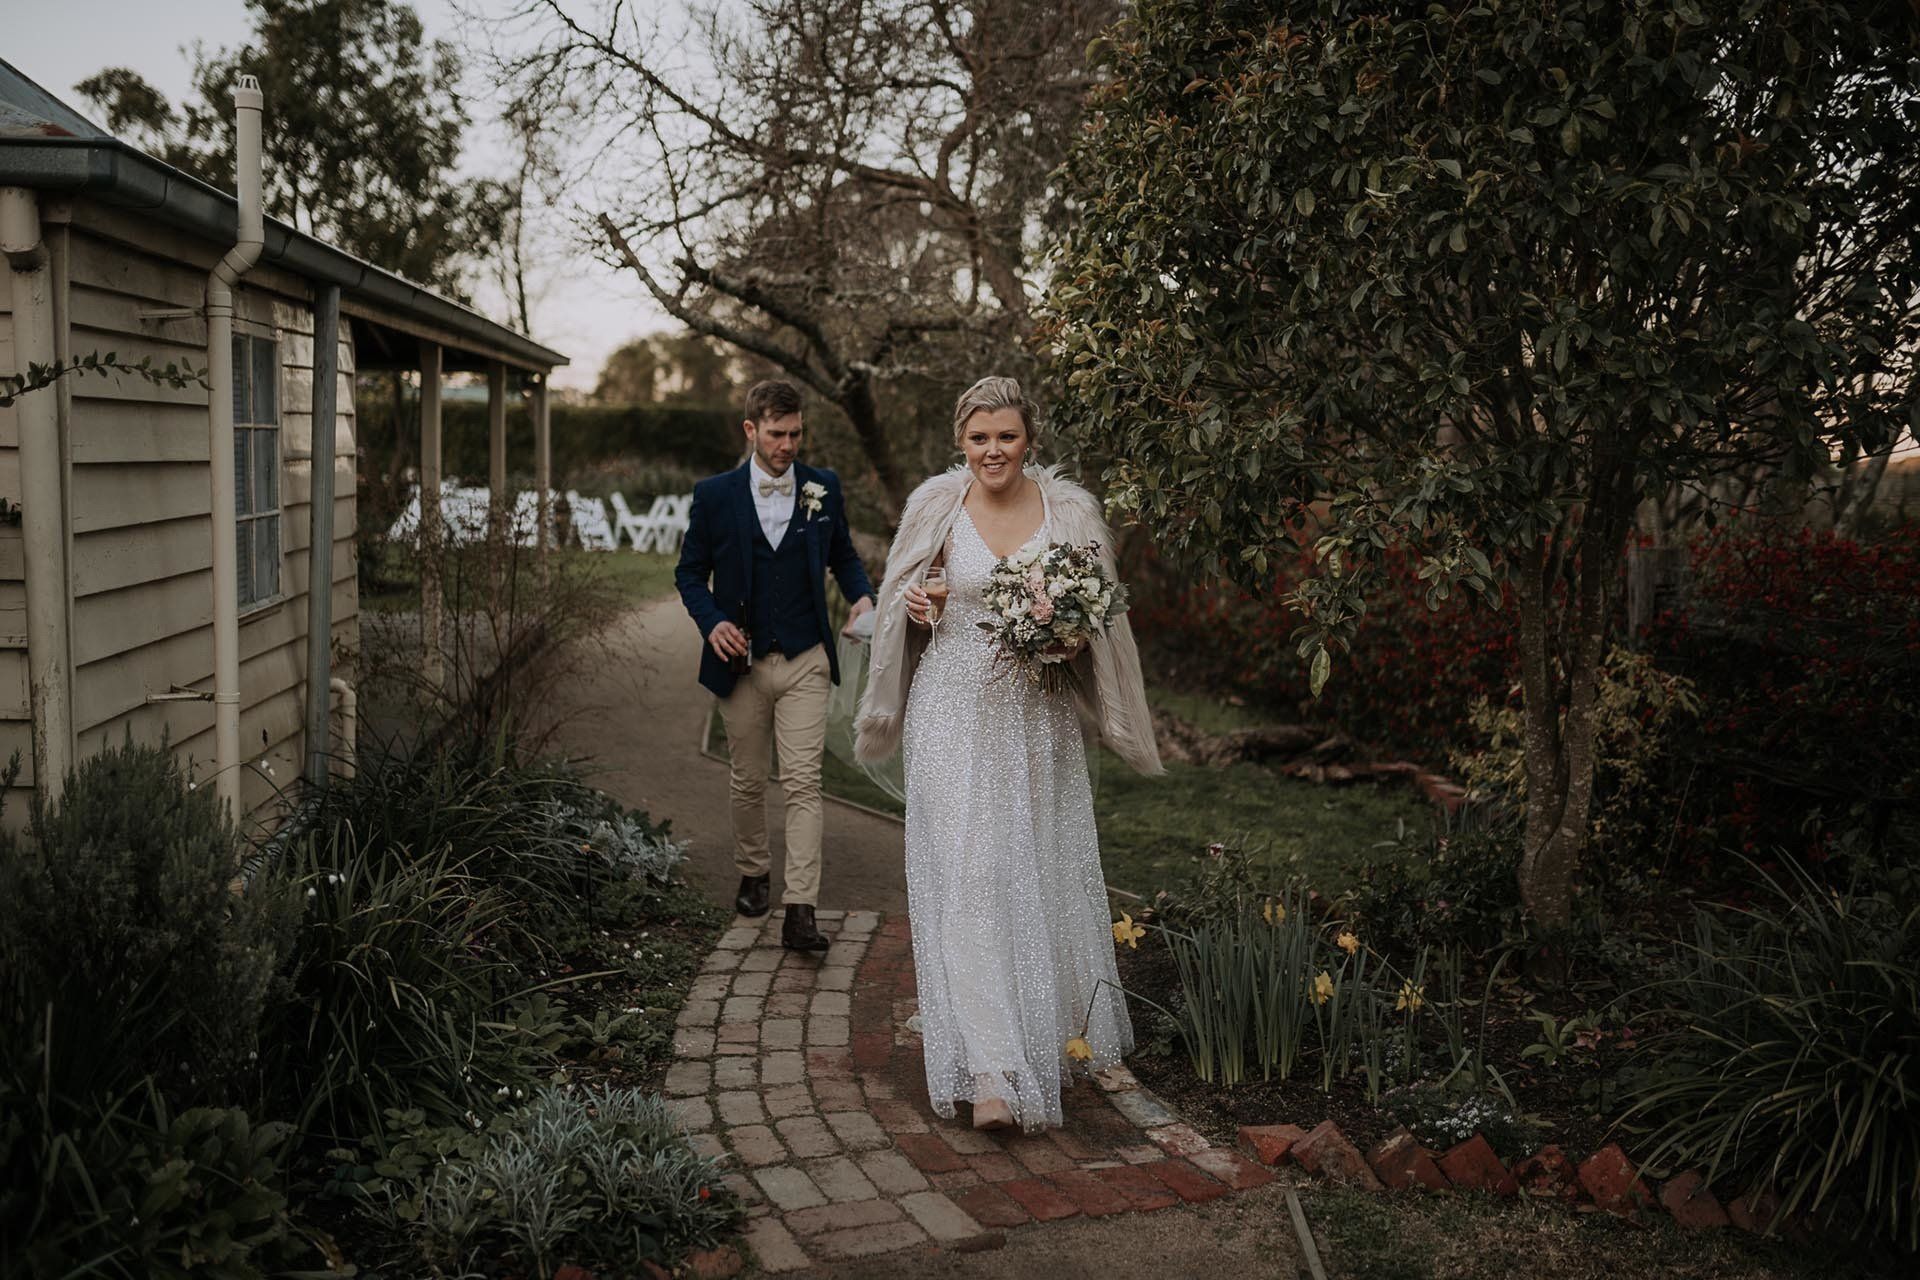 Melbourne Wedding Photographers - Help with posing